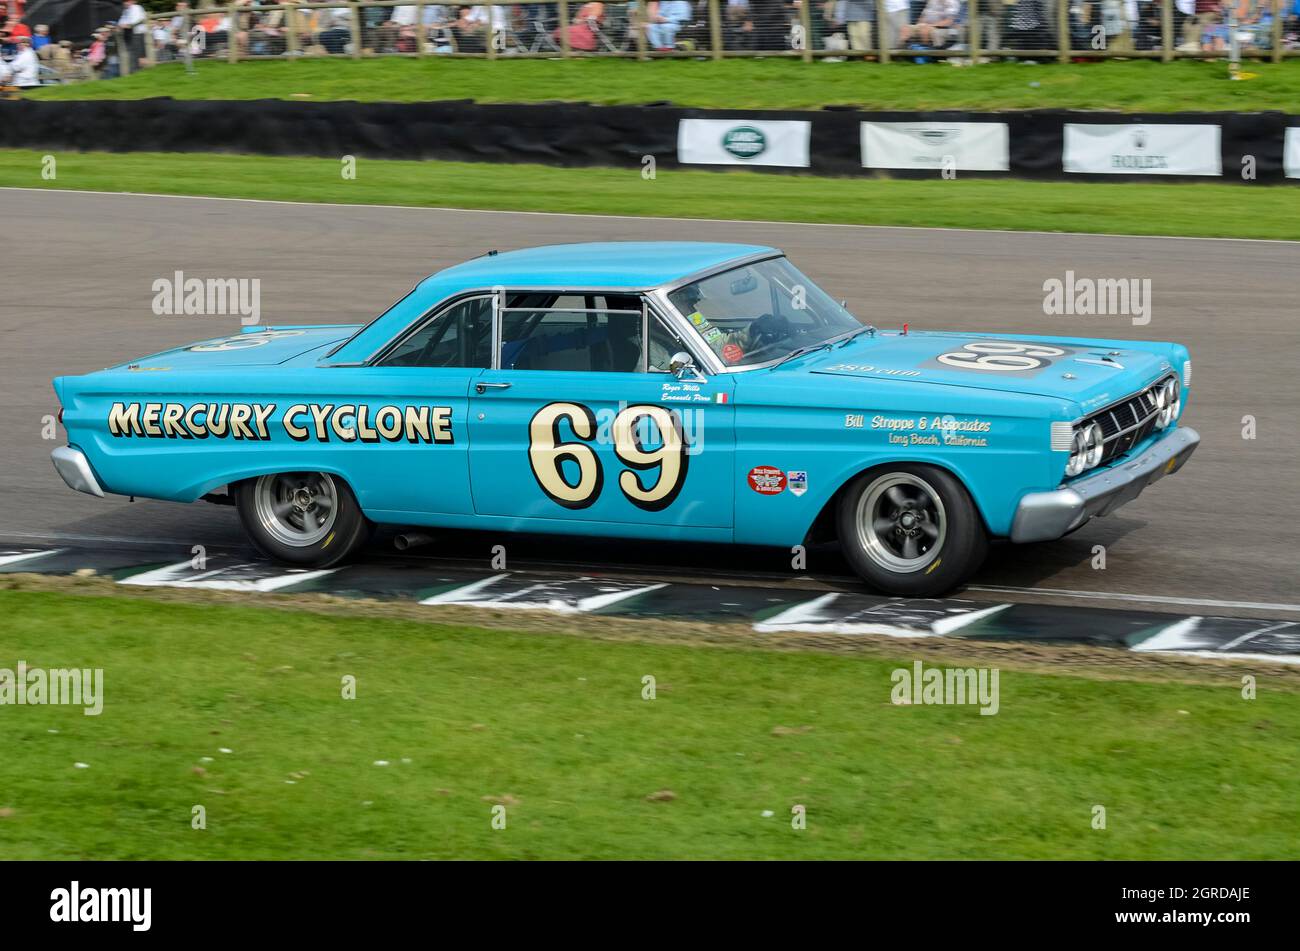 Mercury Comet Cyclone classic, vintage race car, racing in the Shelby Cup for production saloons at the Goodwood Revival 2014 Stock Photo